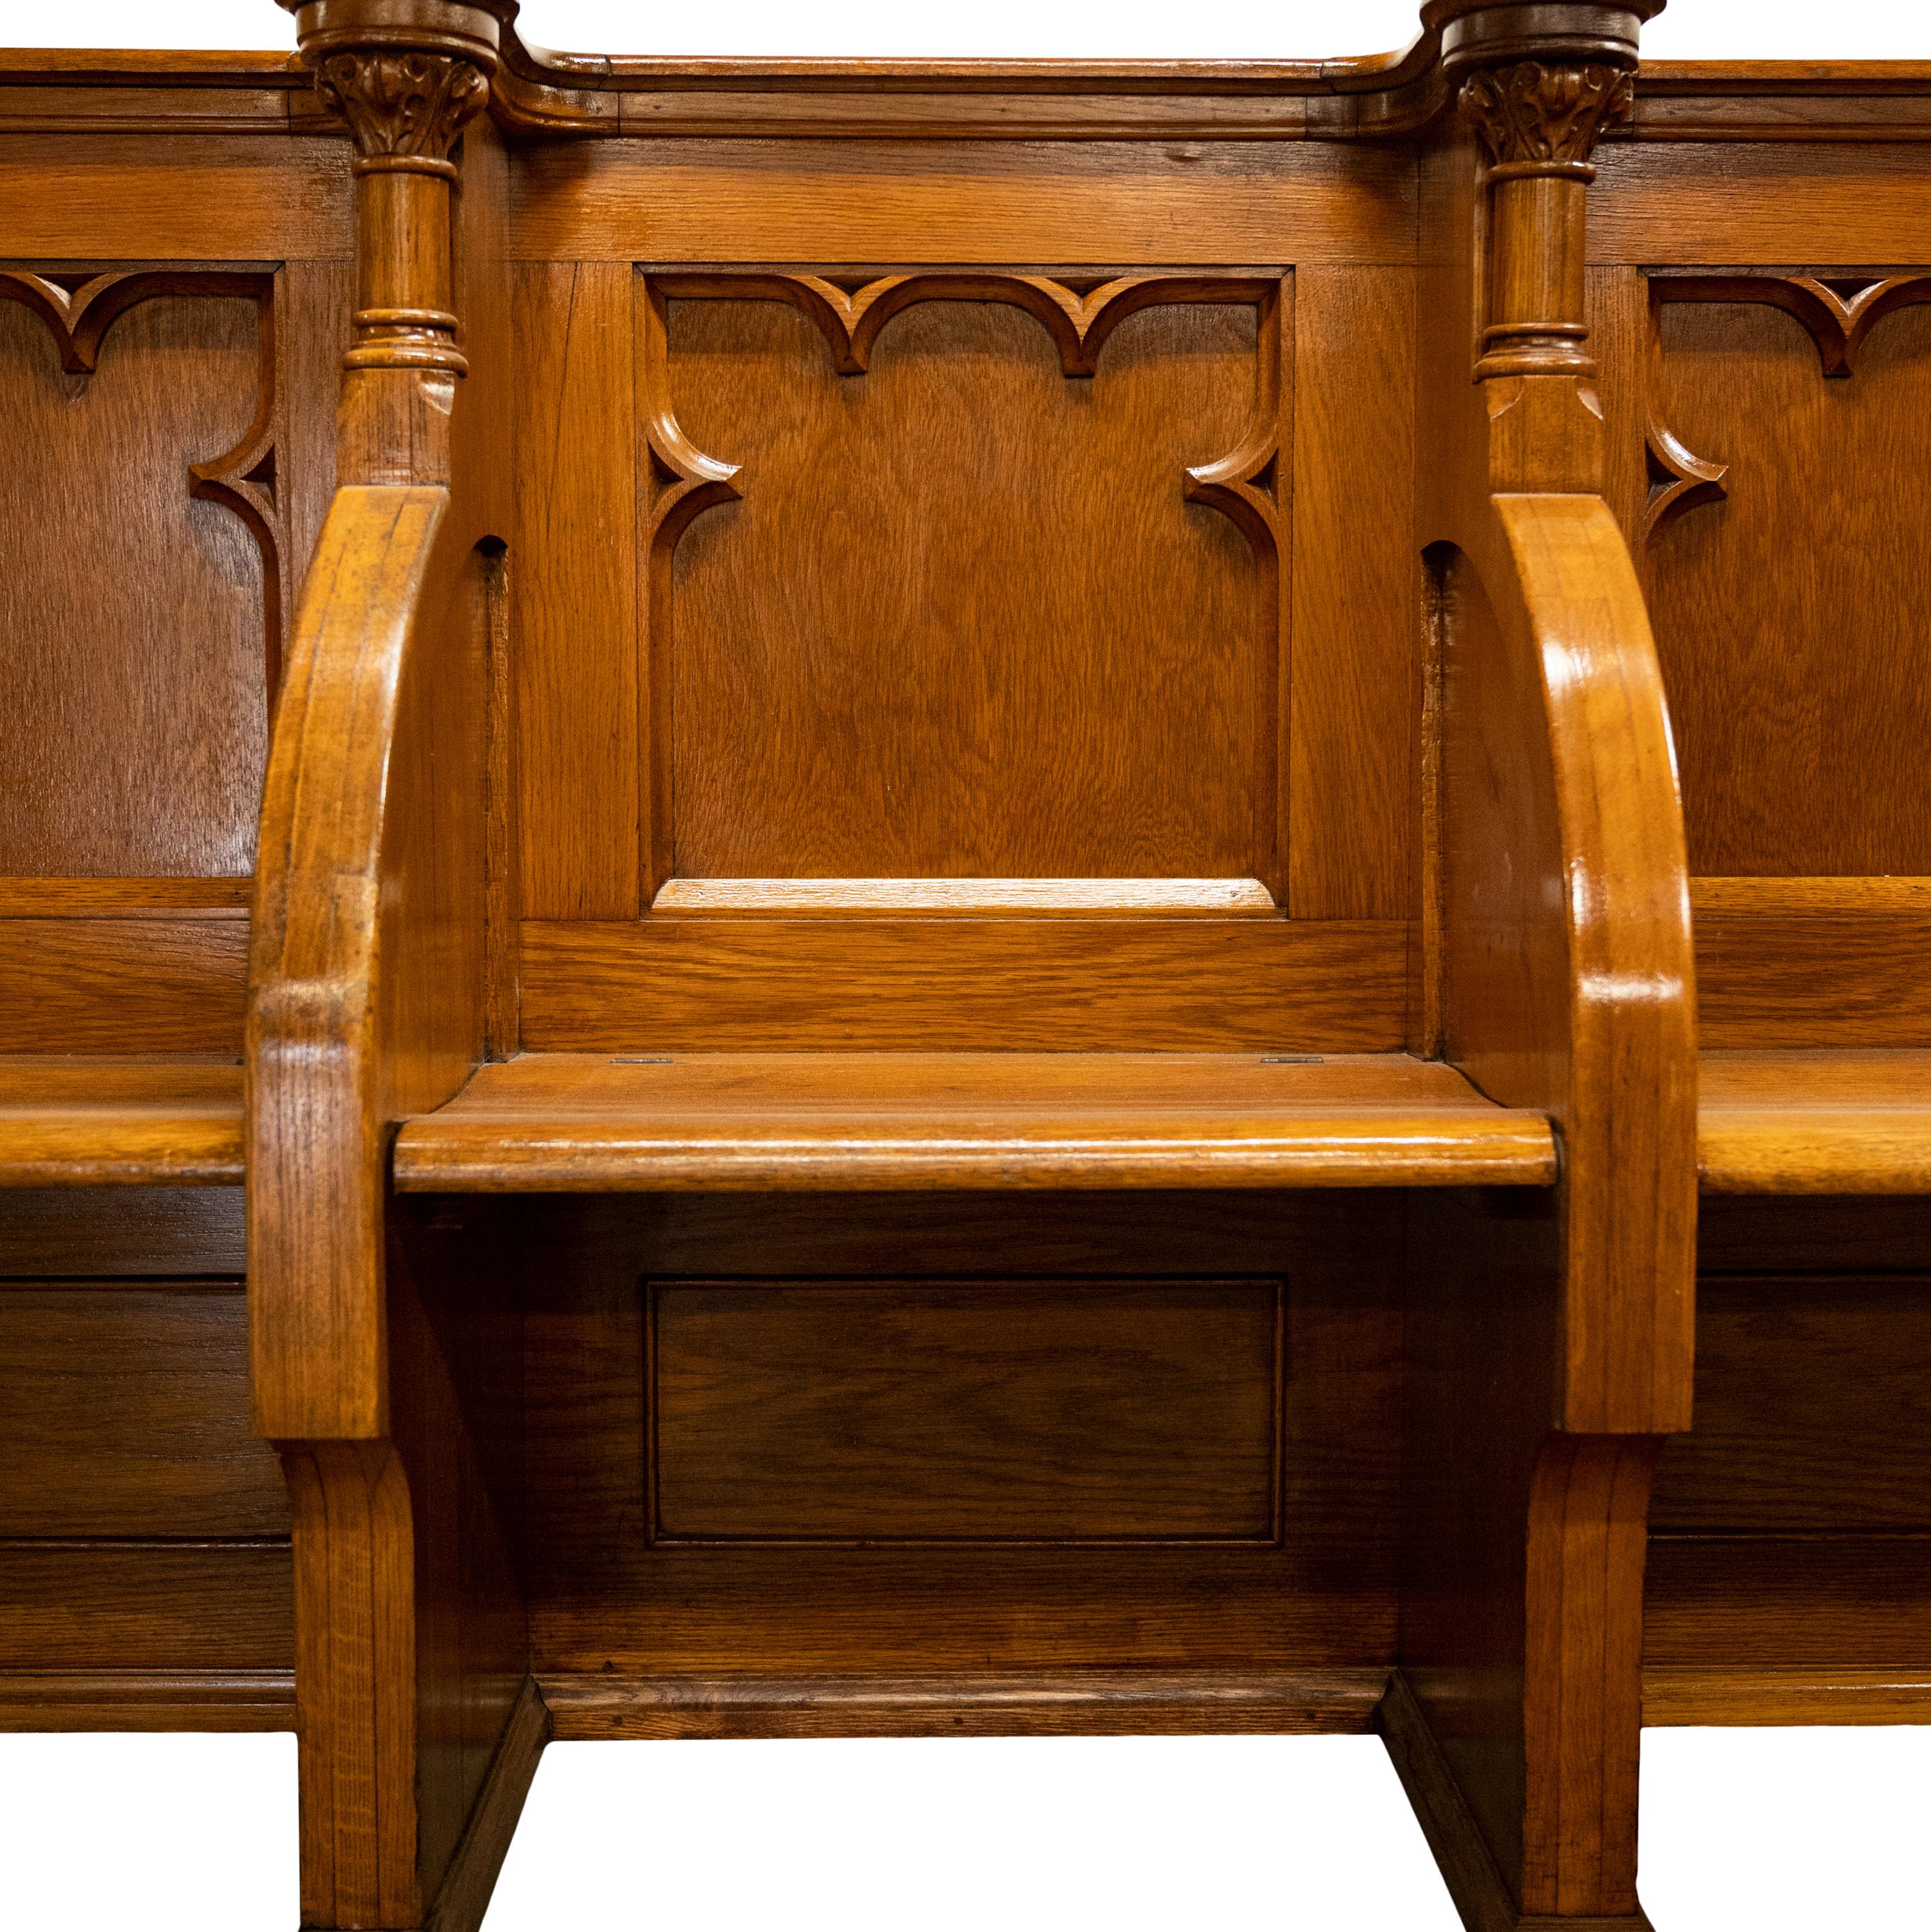 Antique Gothic Revival Pugin Carved Oak Church 3 Seat Pew Bench Choir Stall 1850 5